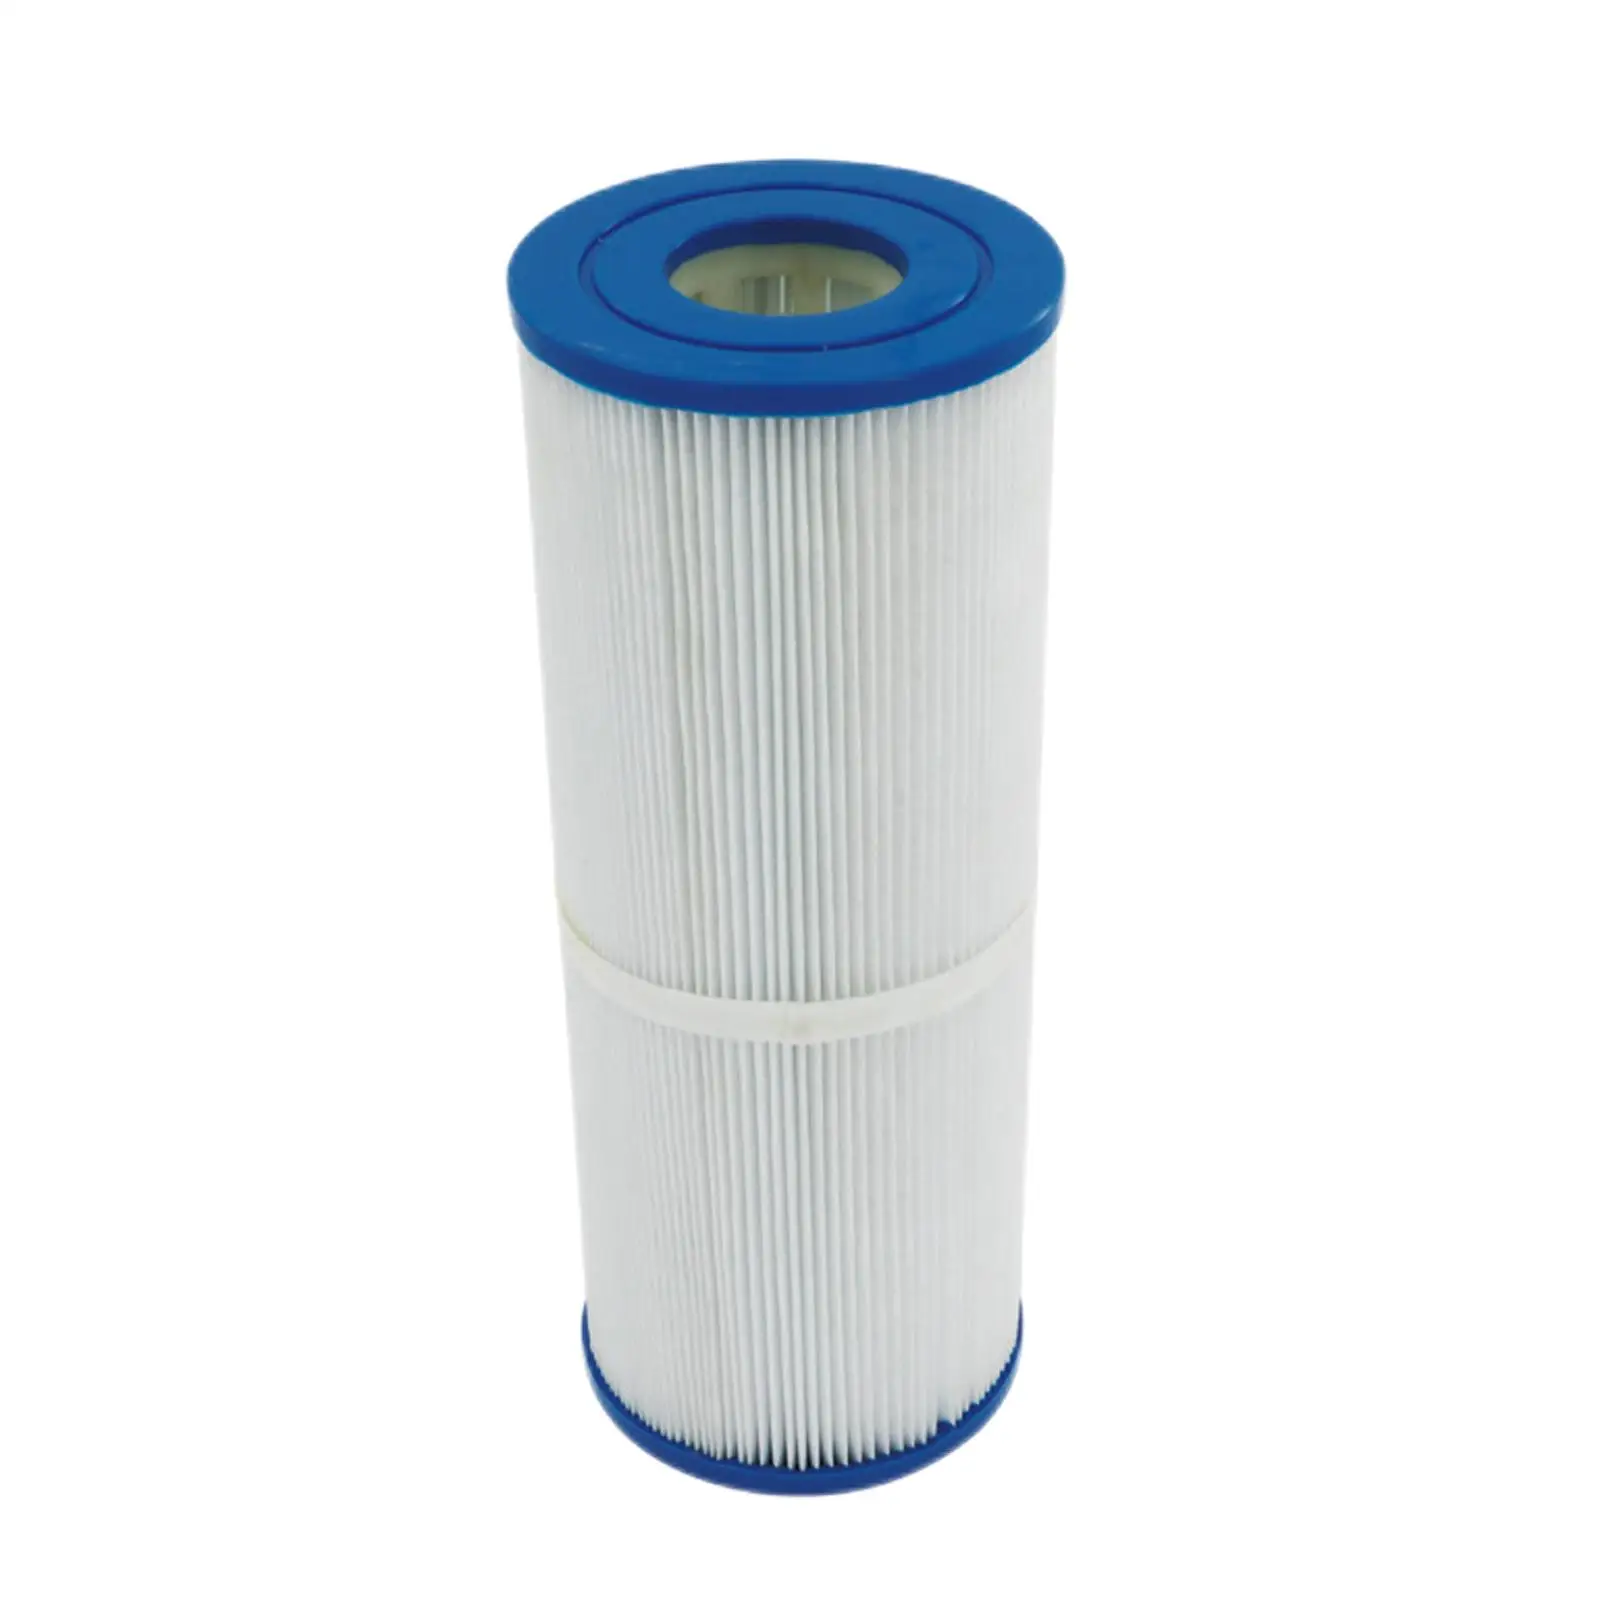  Cartridge Replacement Accessories Plastic Filtration SPA Lightweight Hot Tub Professional SPA Filters for  FC-2390